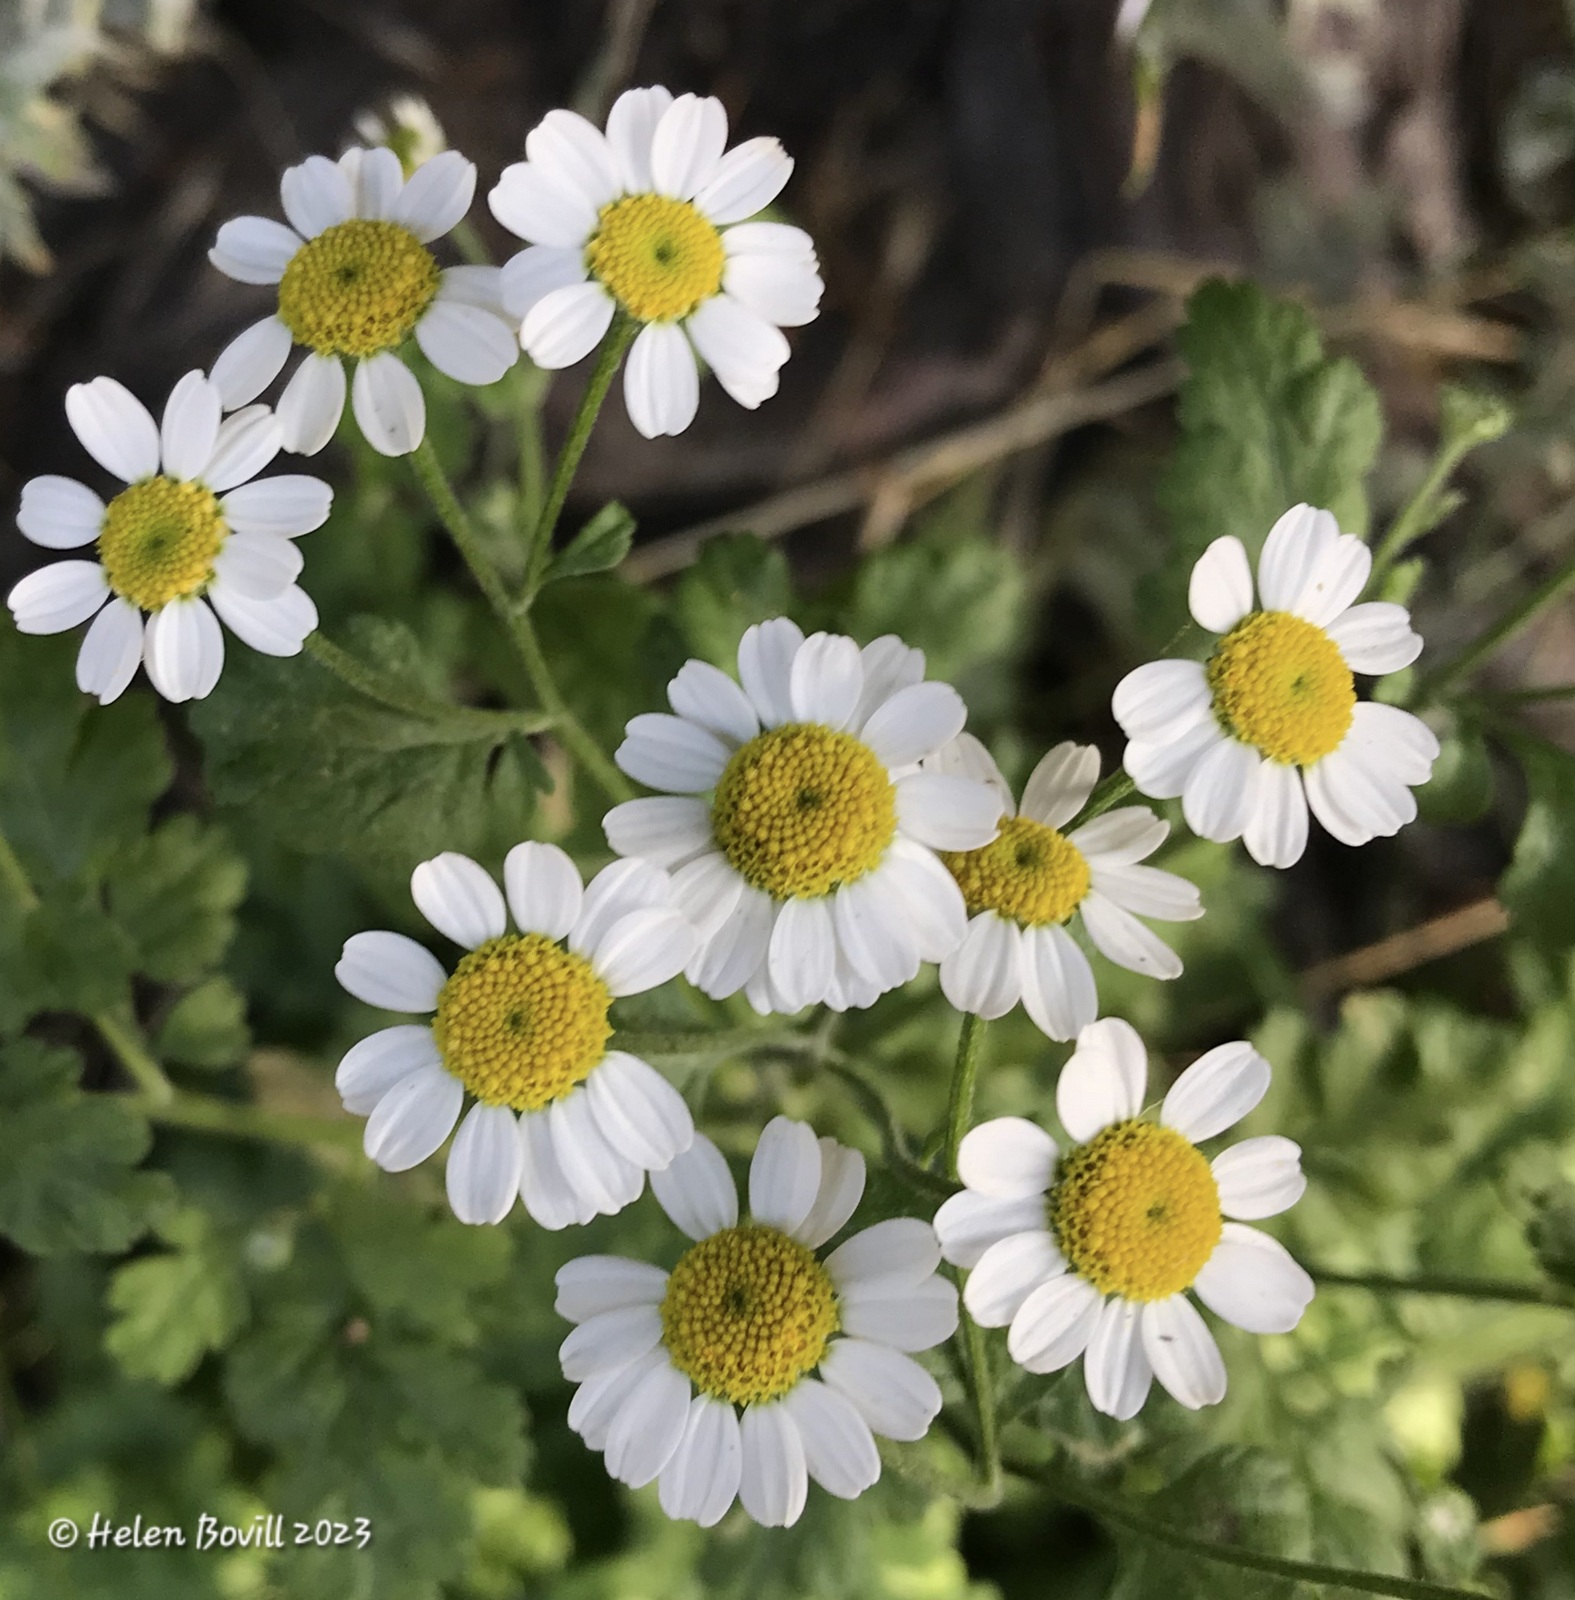 The Daisy-like flowers of Feverfew growing in the cemetery